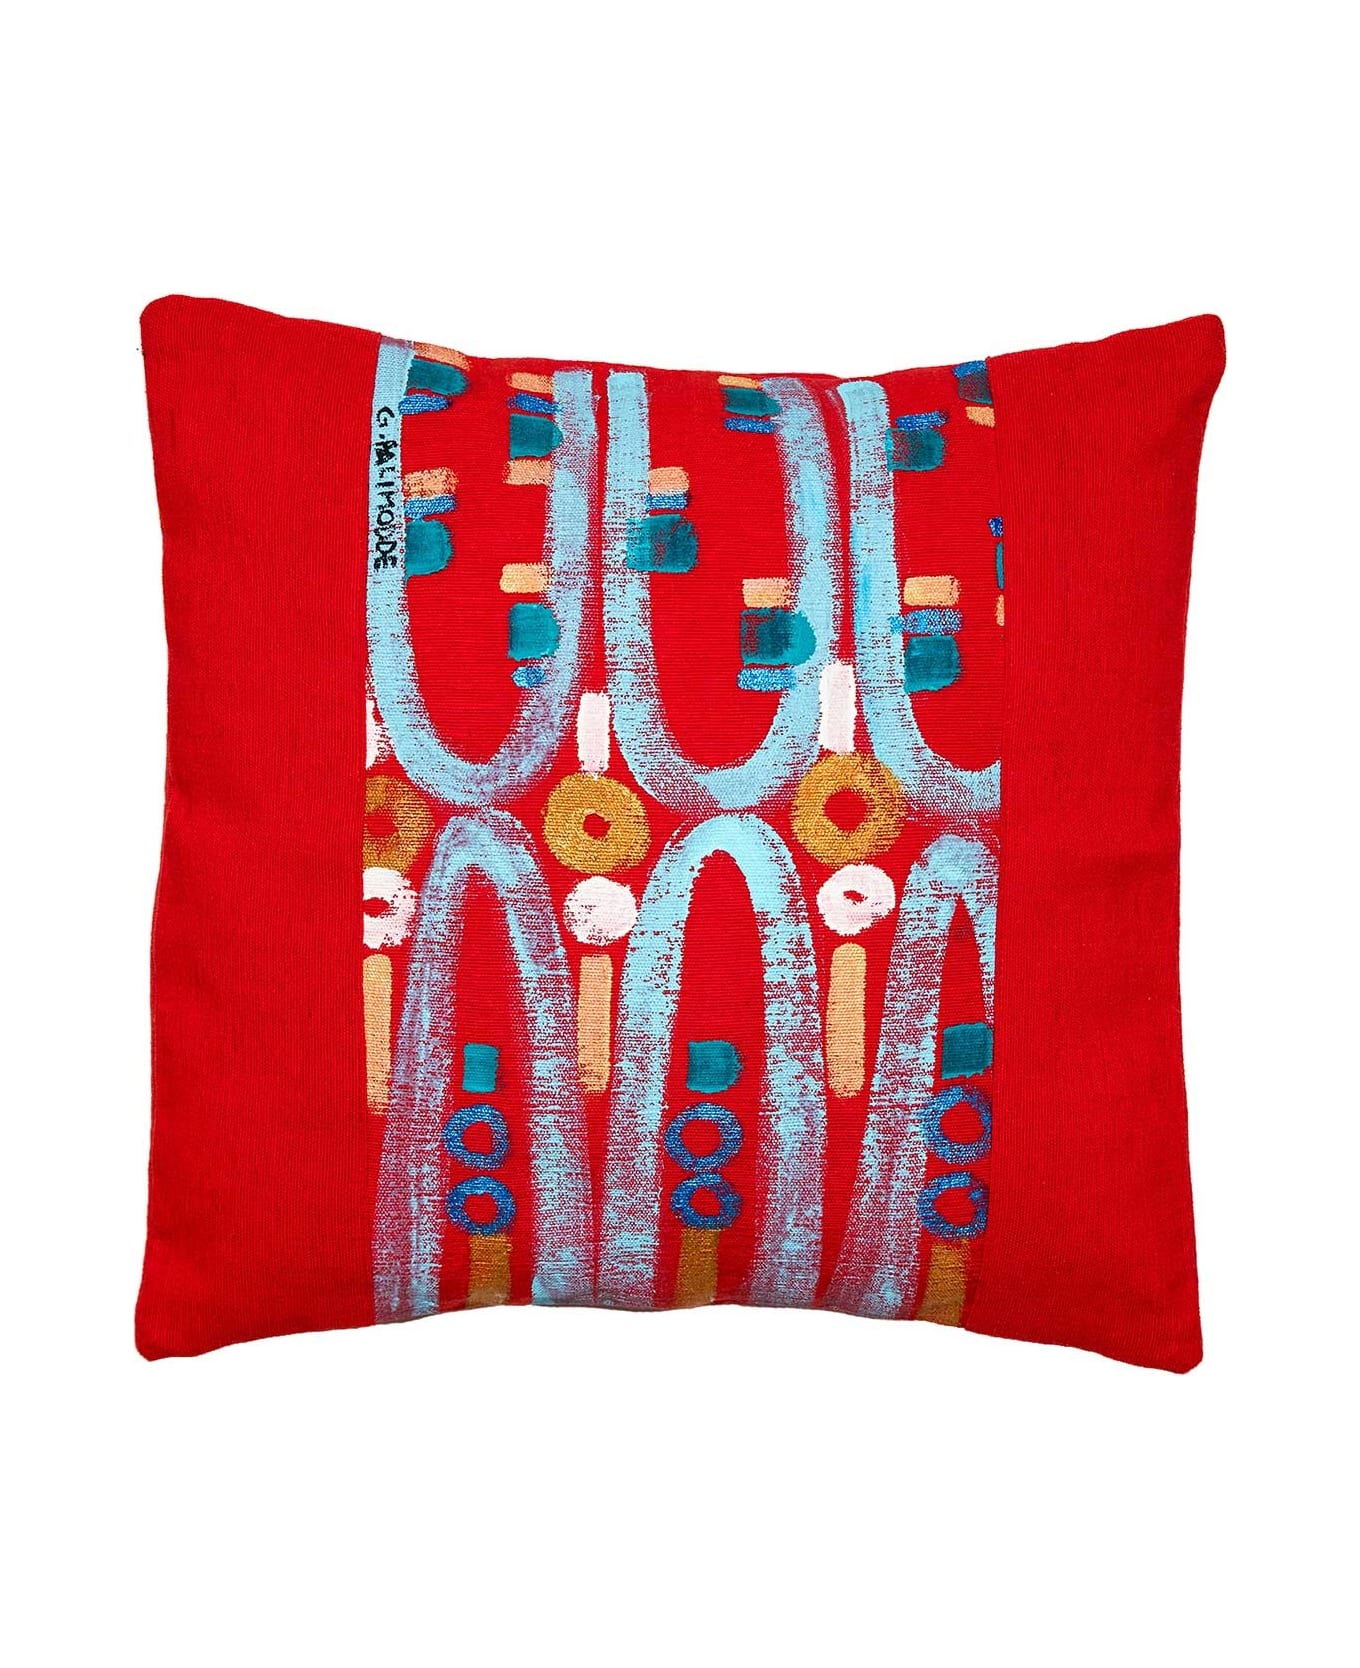 Le Botteghe su Gologone Cotton Hand Painted Indoor Cushion 80x80 cm - Red Fantasy クッション